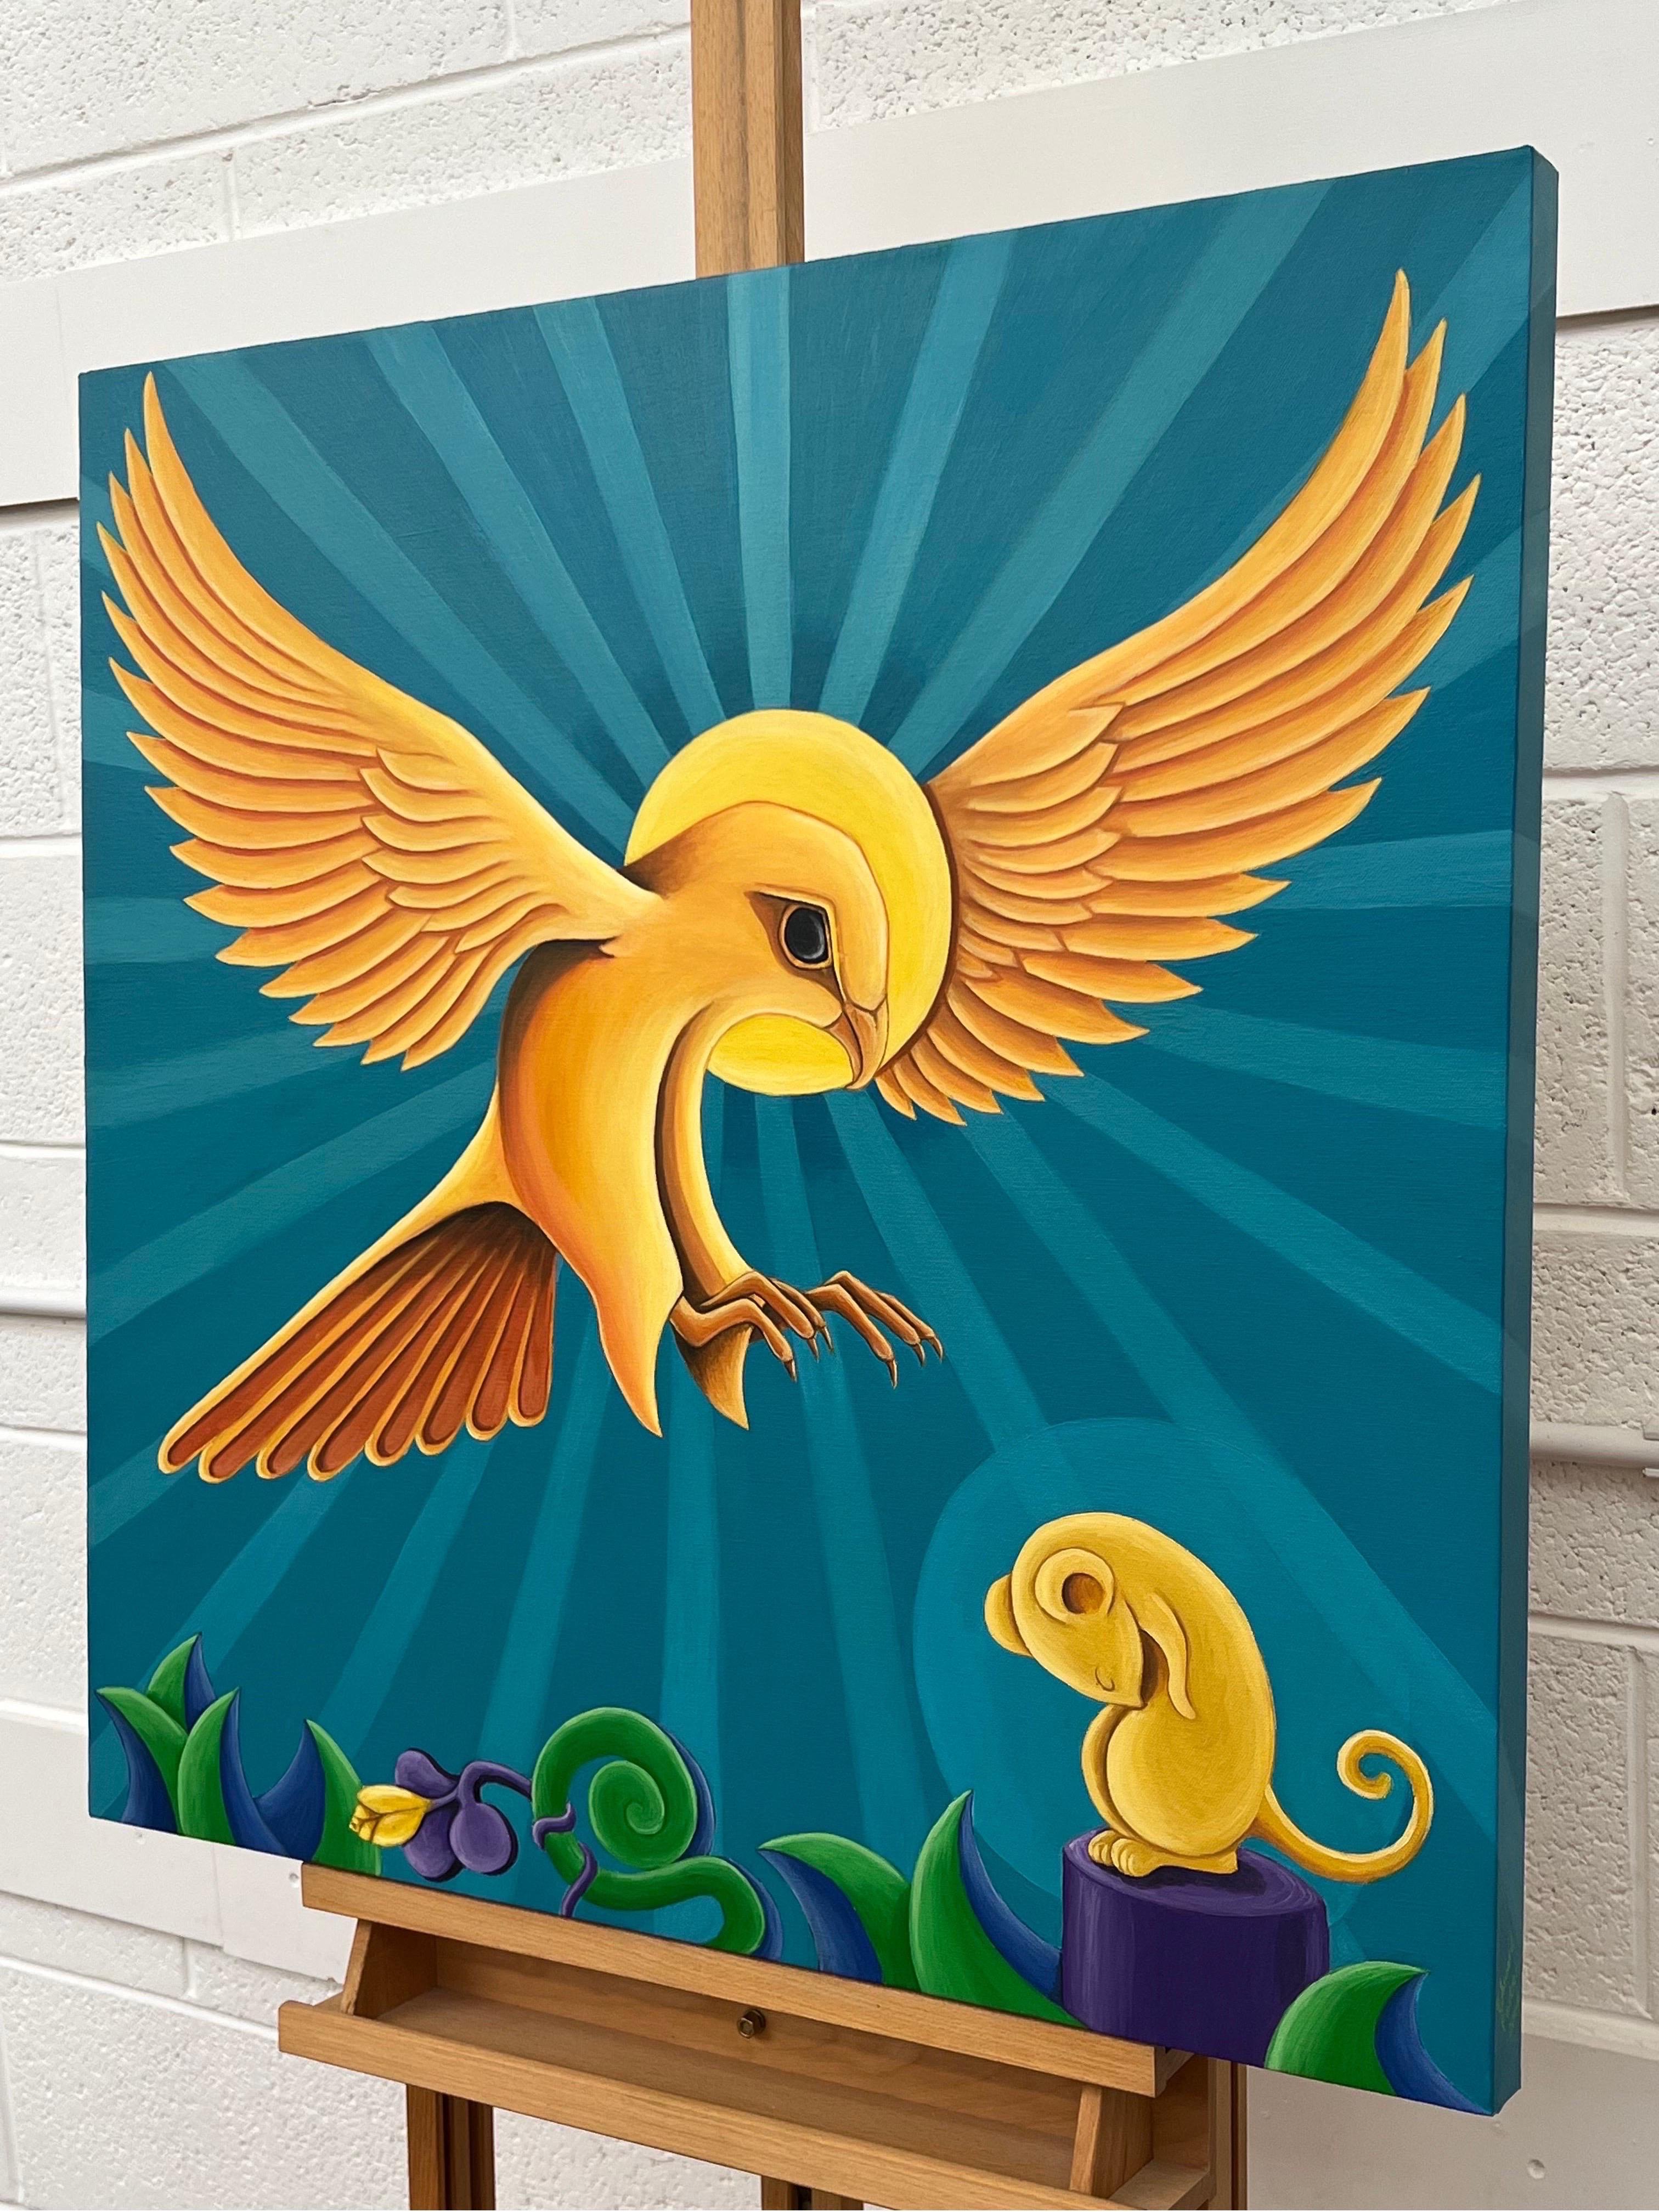 Sacrifice - Surreal Painting of Golden Yellow Bird of Prey Hunting a Mouse, by Contemporary British Artist 

Original, Oil on Canvas 
30 x 30 inches 
Unframed 

The painting continues onto the sides of the box canvas and is signed on the side of the